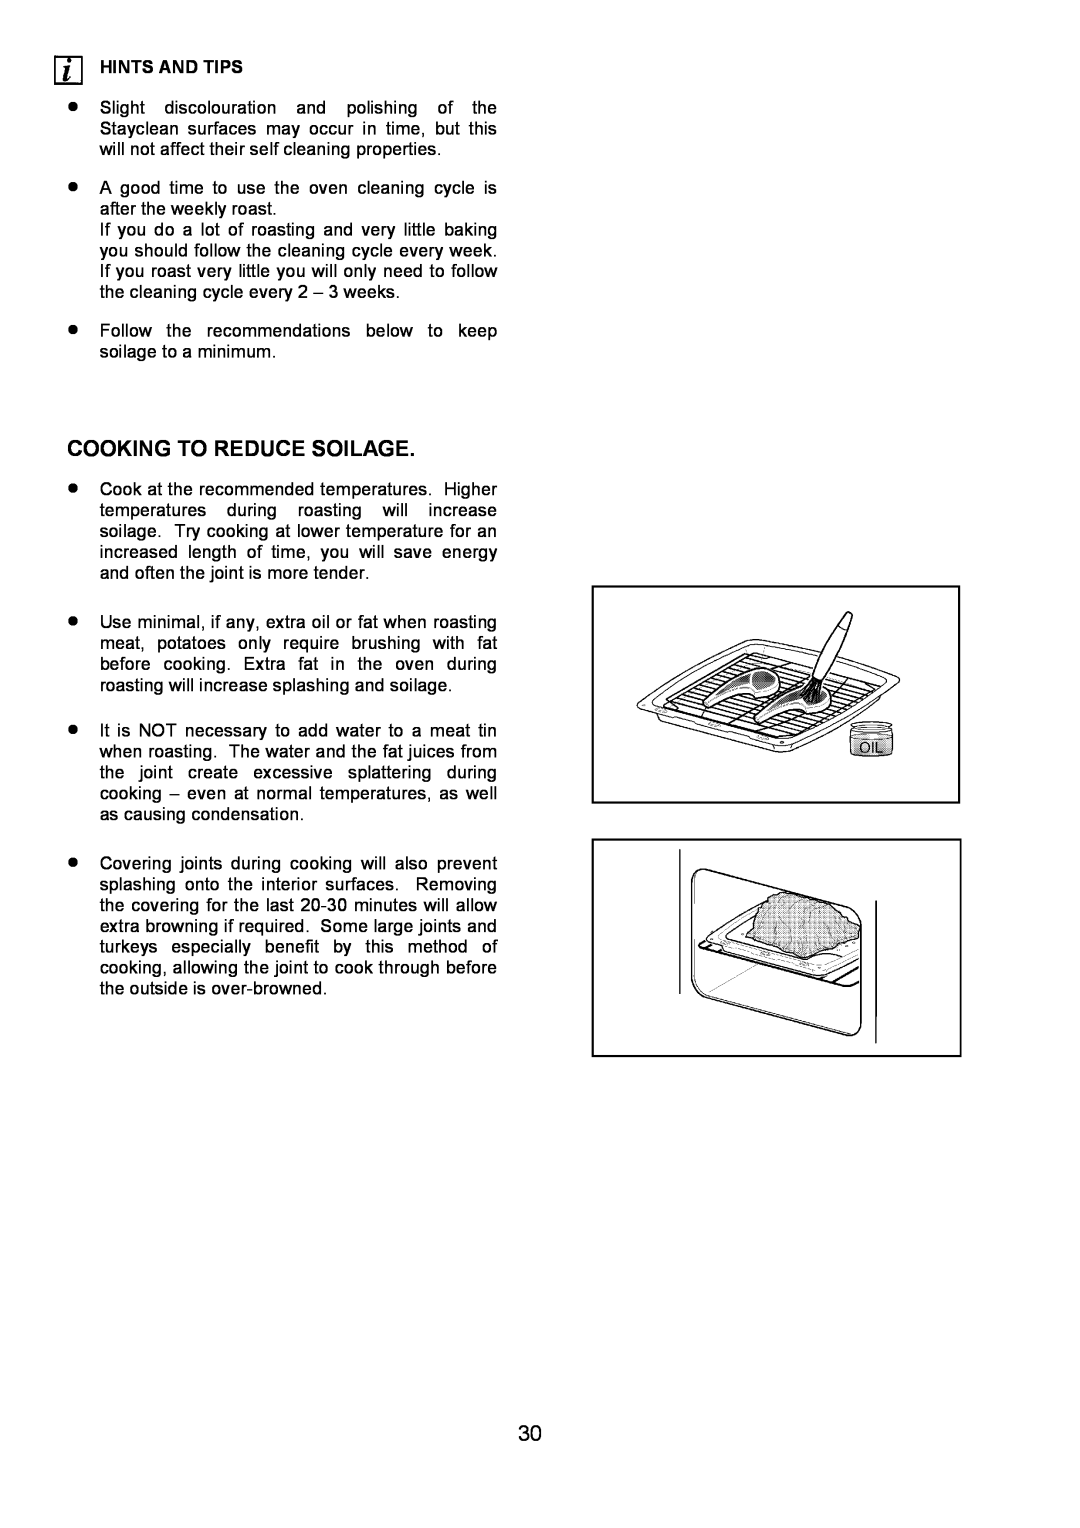 AEG 3210 BU installation instructions Cooking To Reduce Soilage, Hints And Tips 